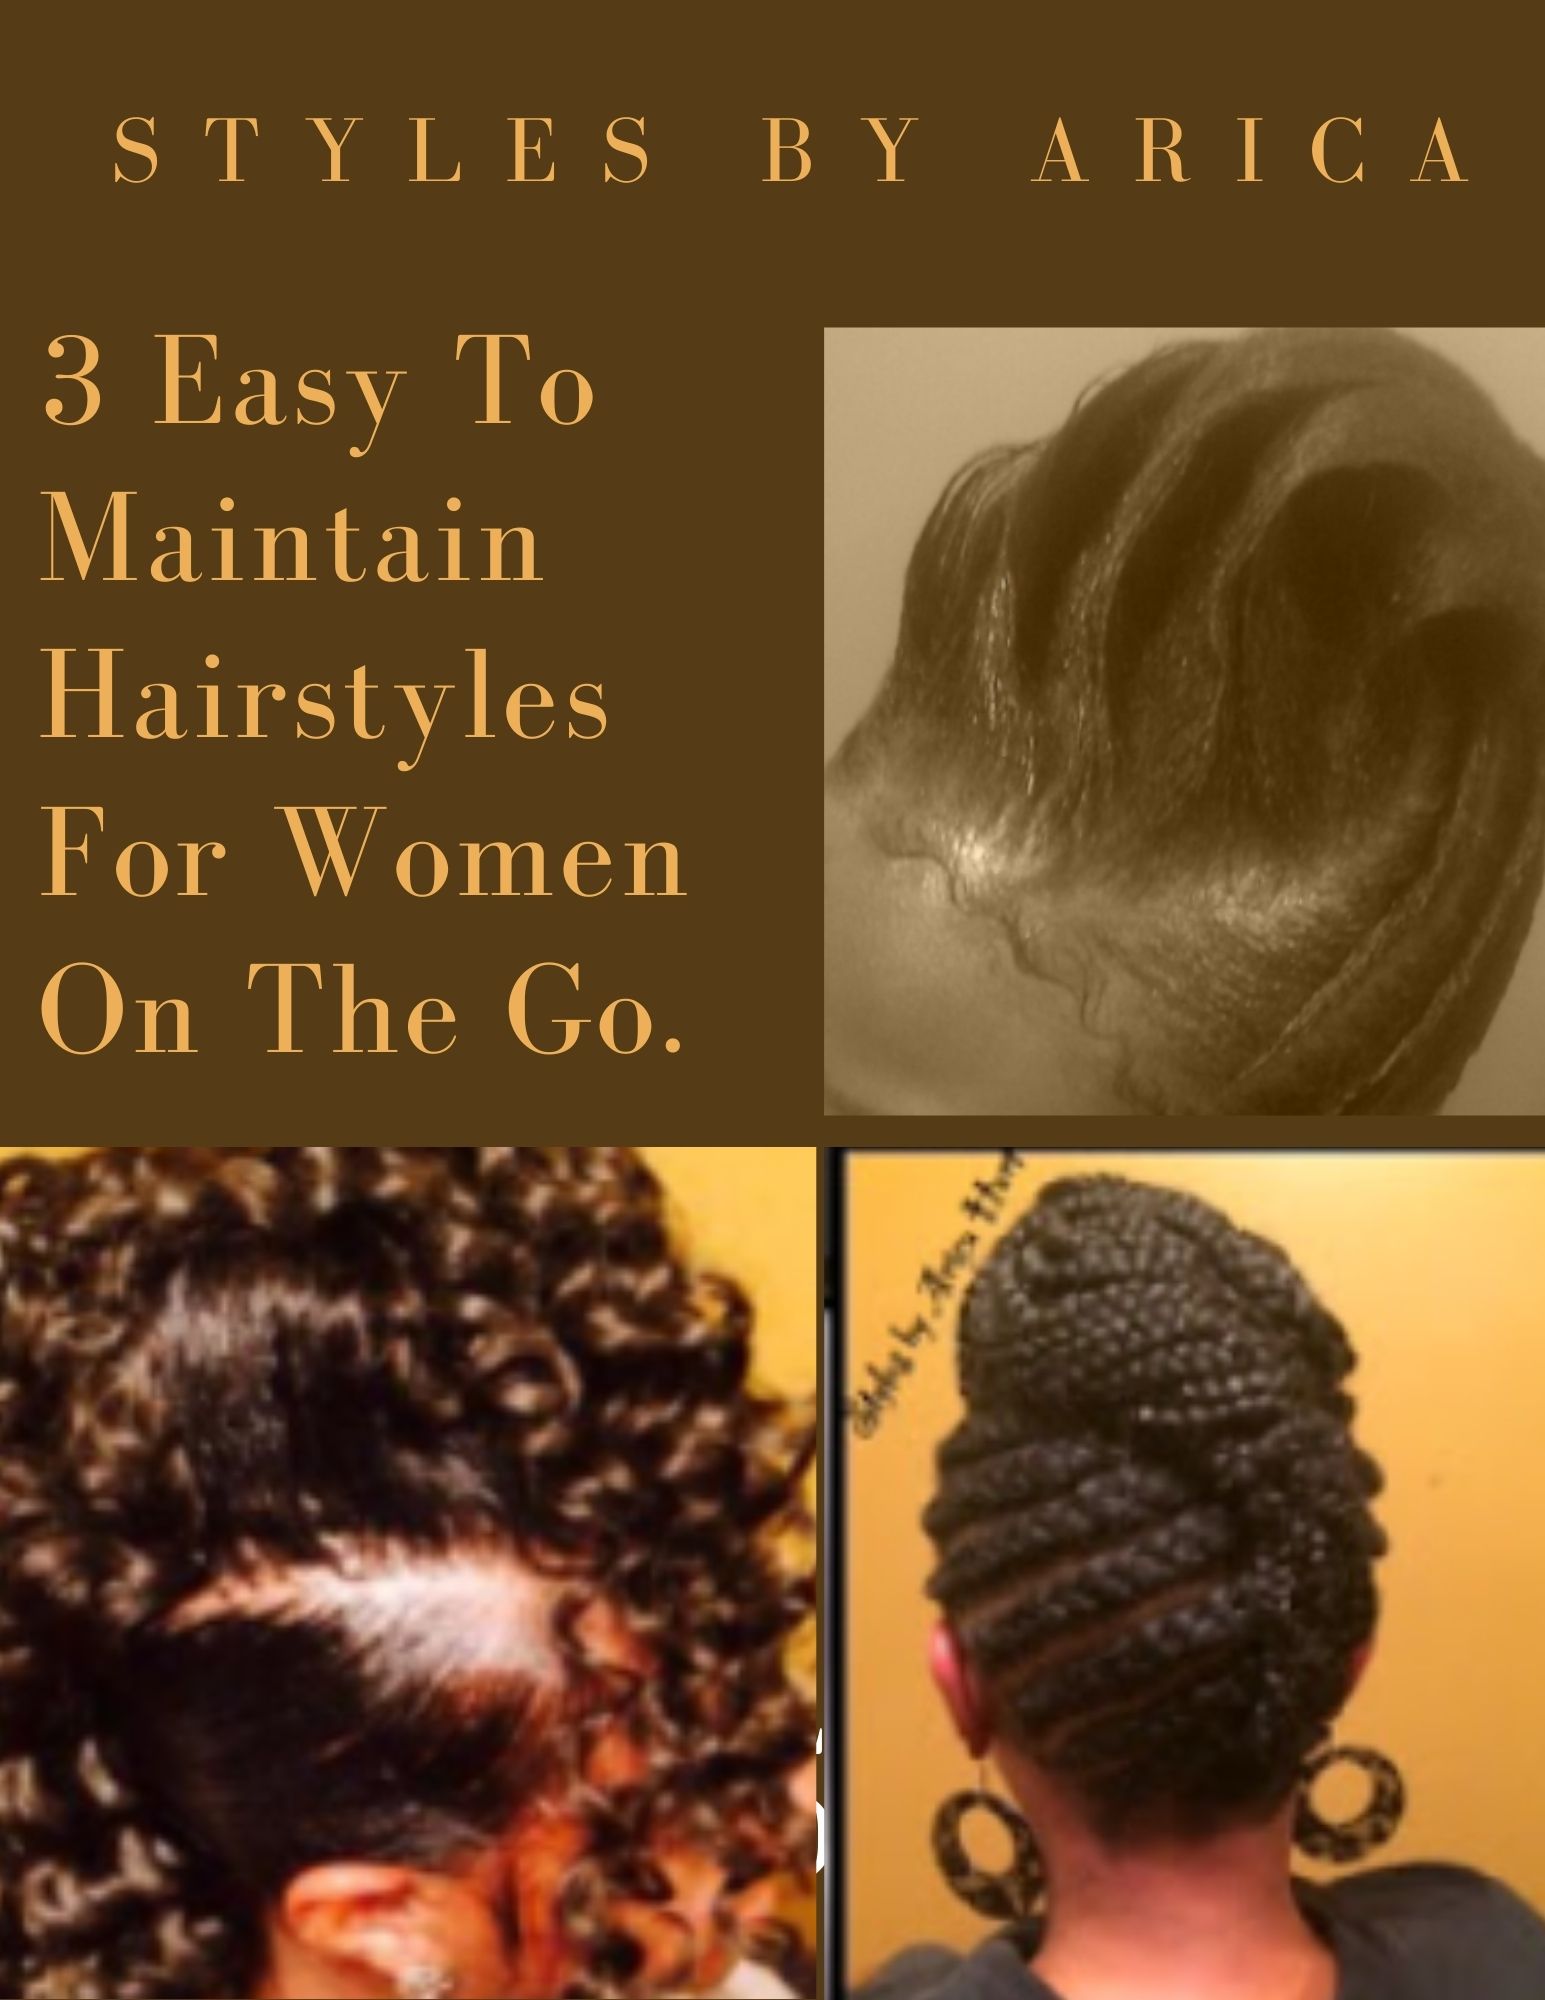 4 Hairstyles For Yoga | Quick & Easy Hairstyles | BlackDoctor.org